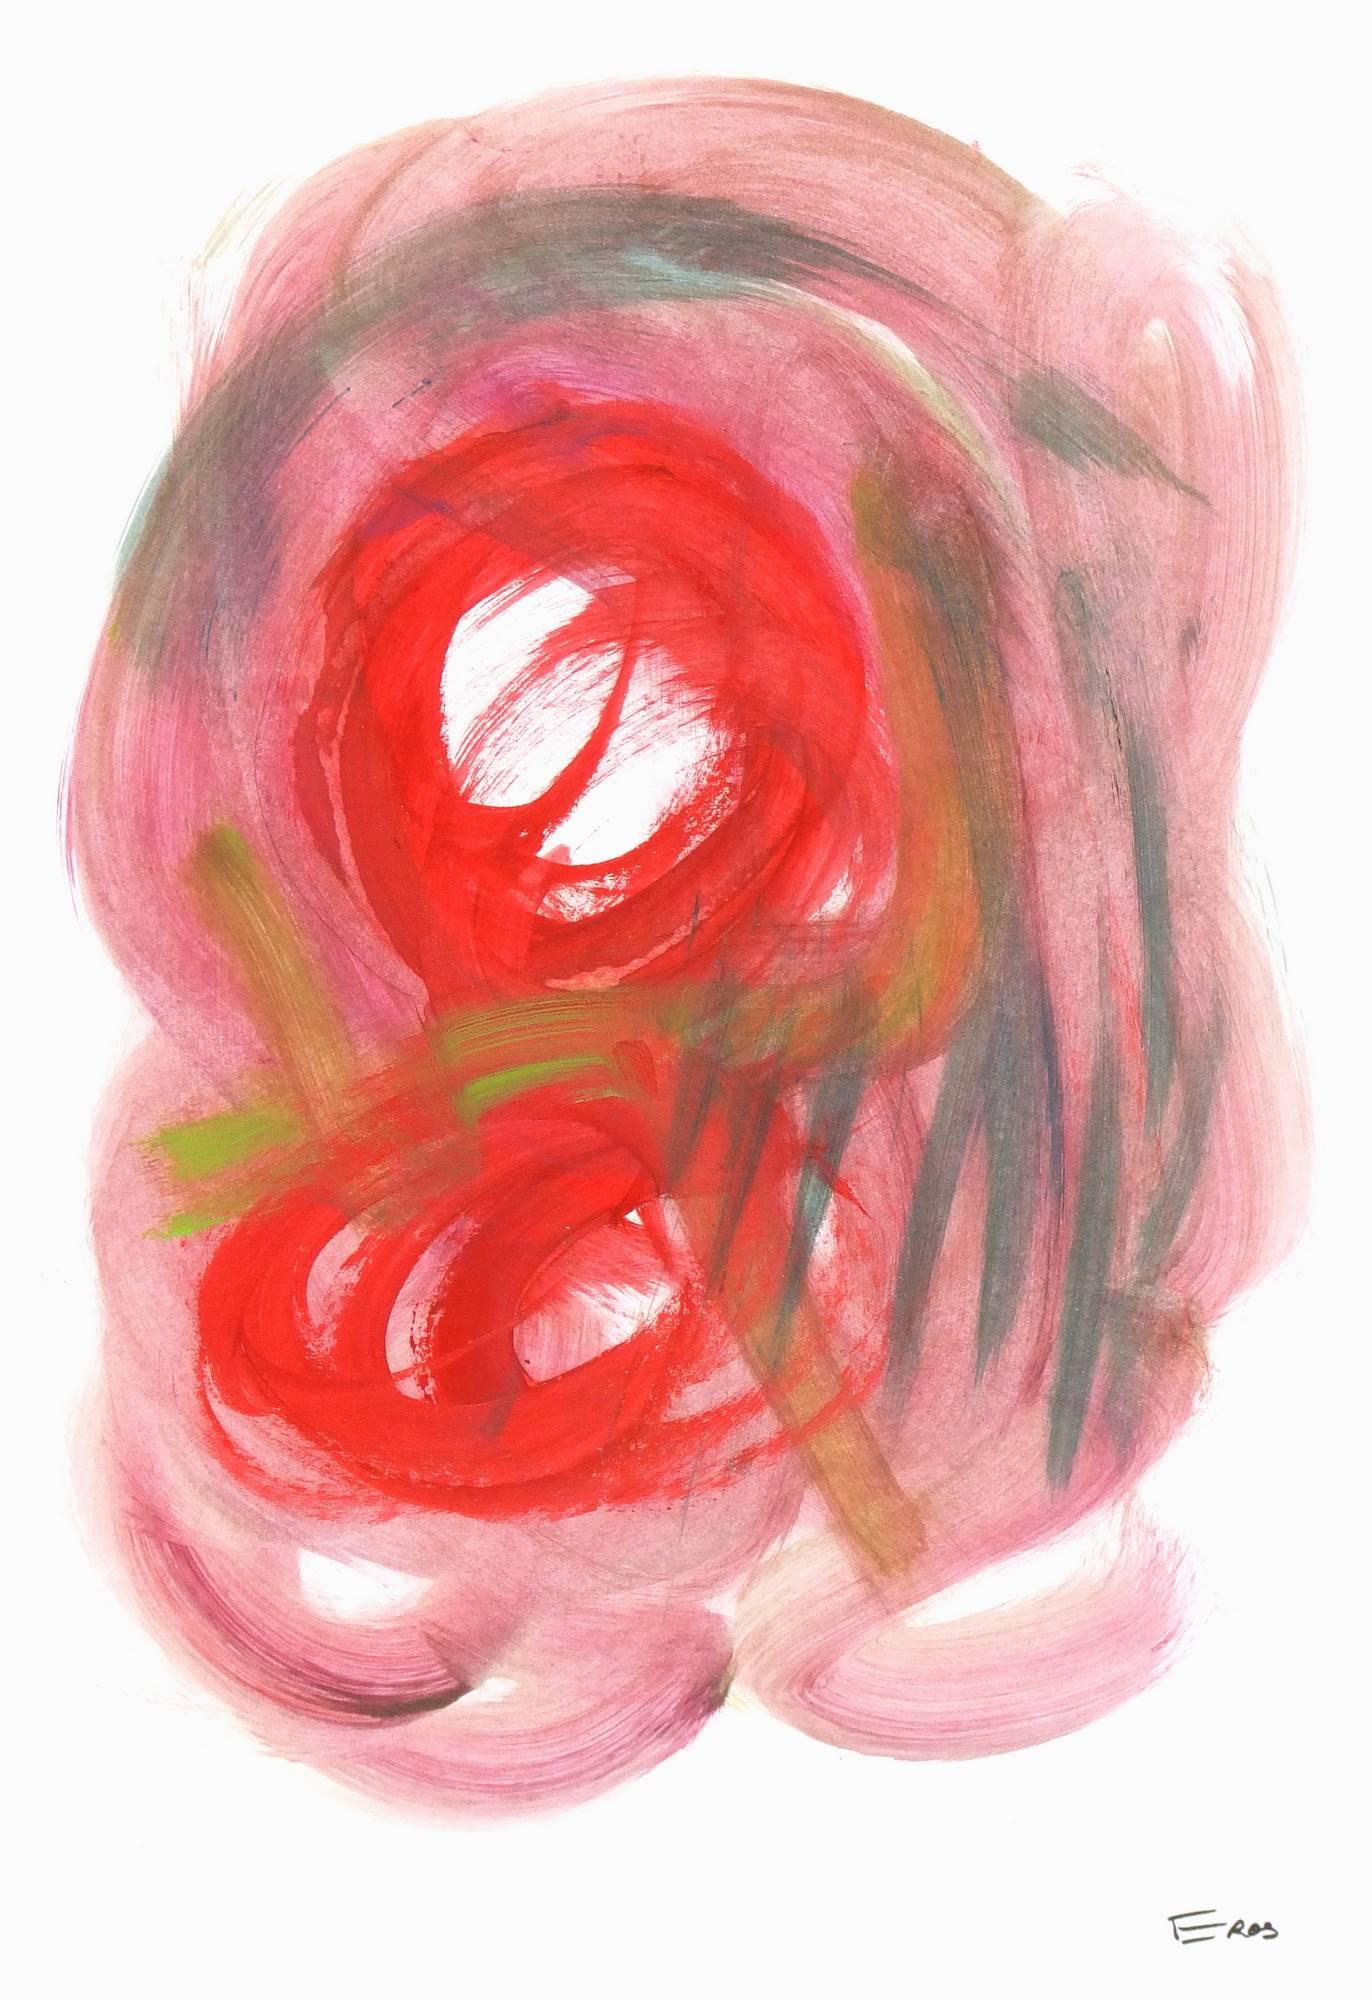 Abstract painting in acrylic by French artist Eros, 2011.  The painting's rich reds, pinks, and greens mingle in a smooth, circular motion. Signed lower right.

Original artwork on paper displayed on a white mat with a gold border. Mat fits a